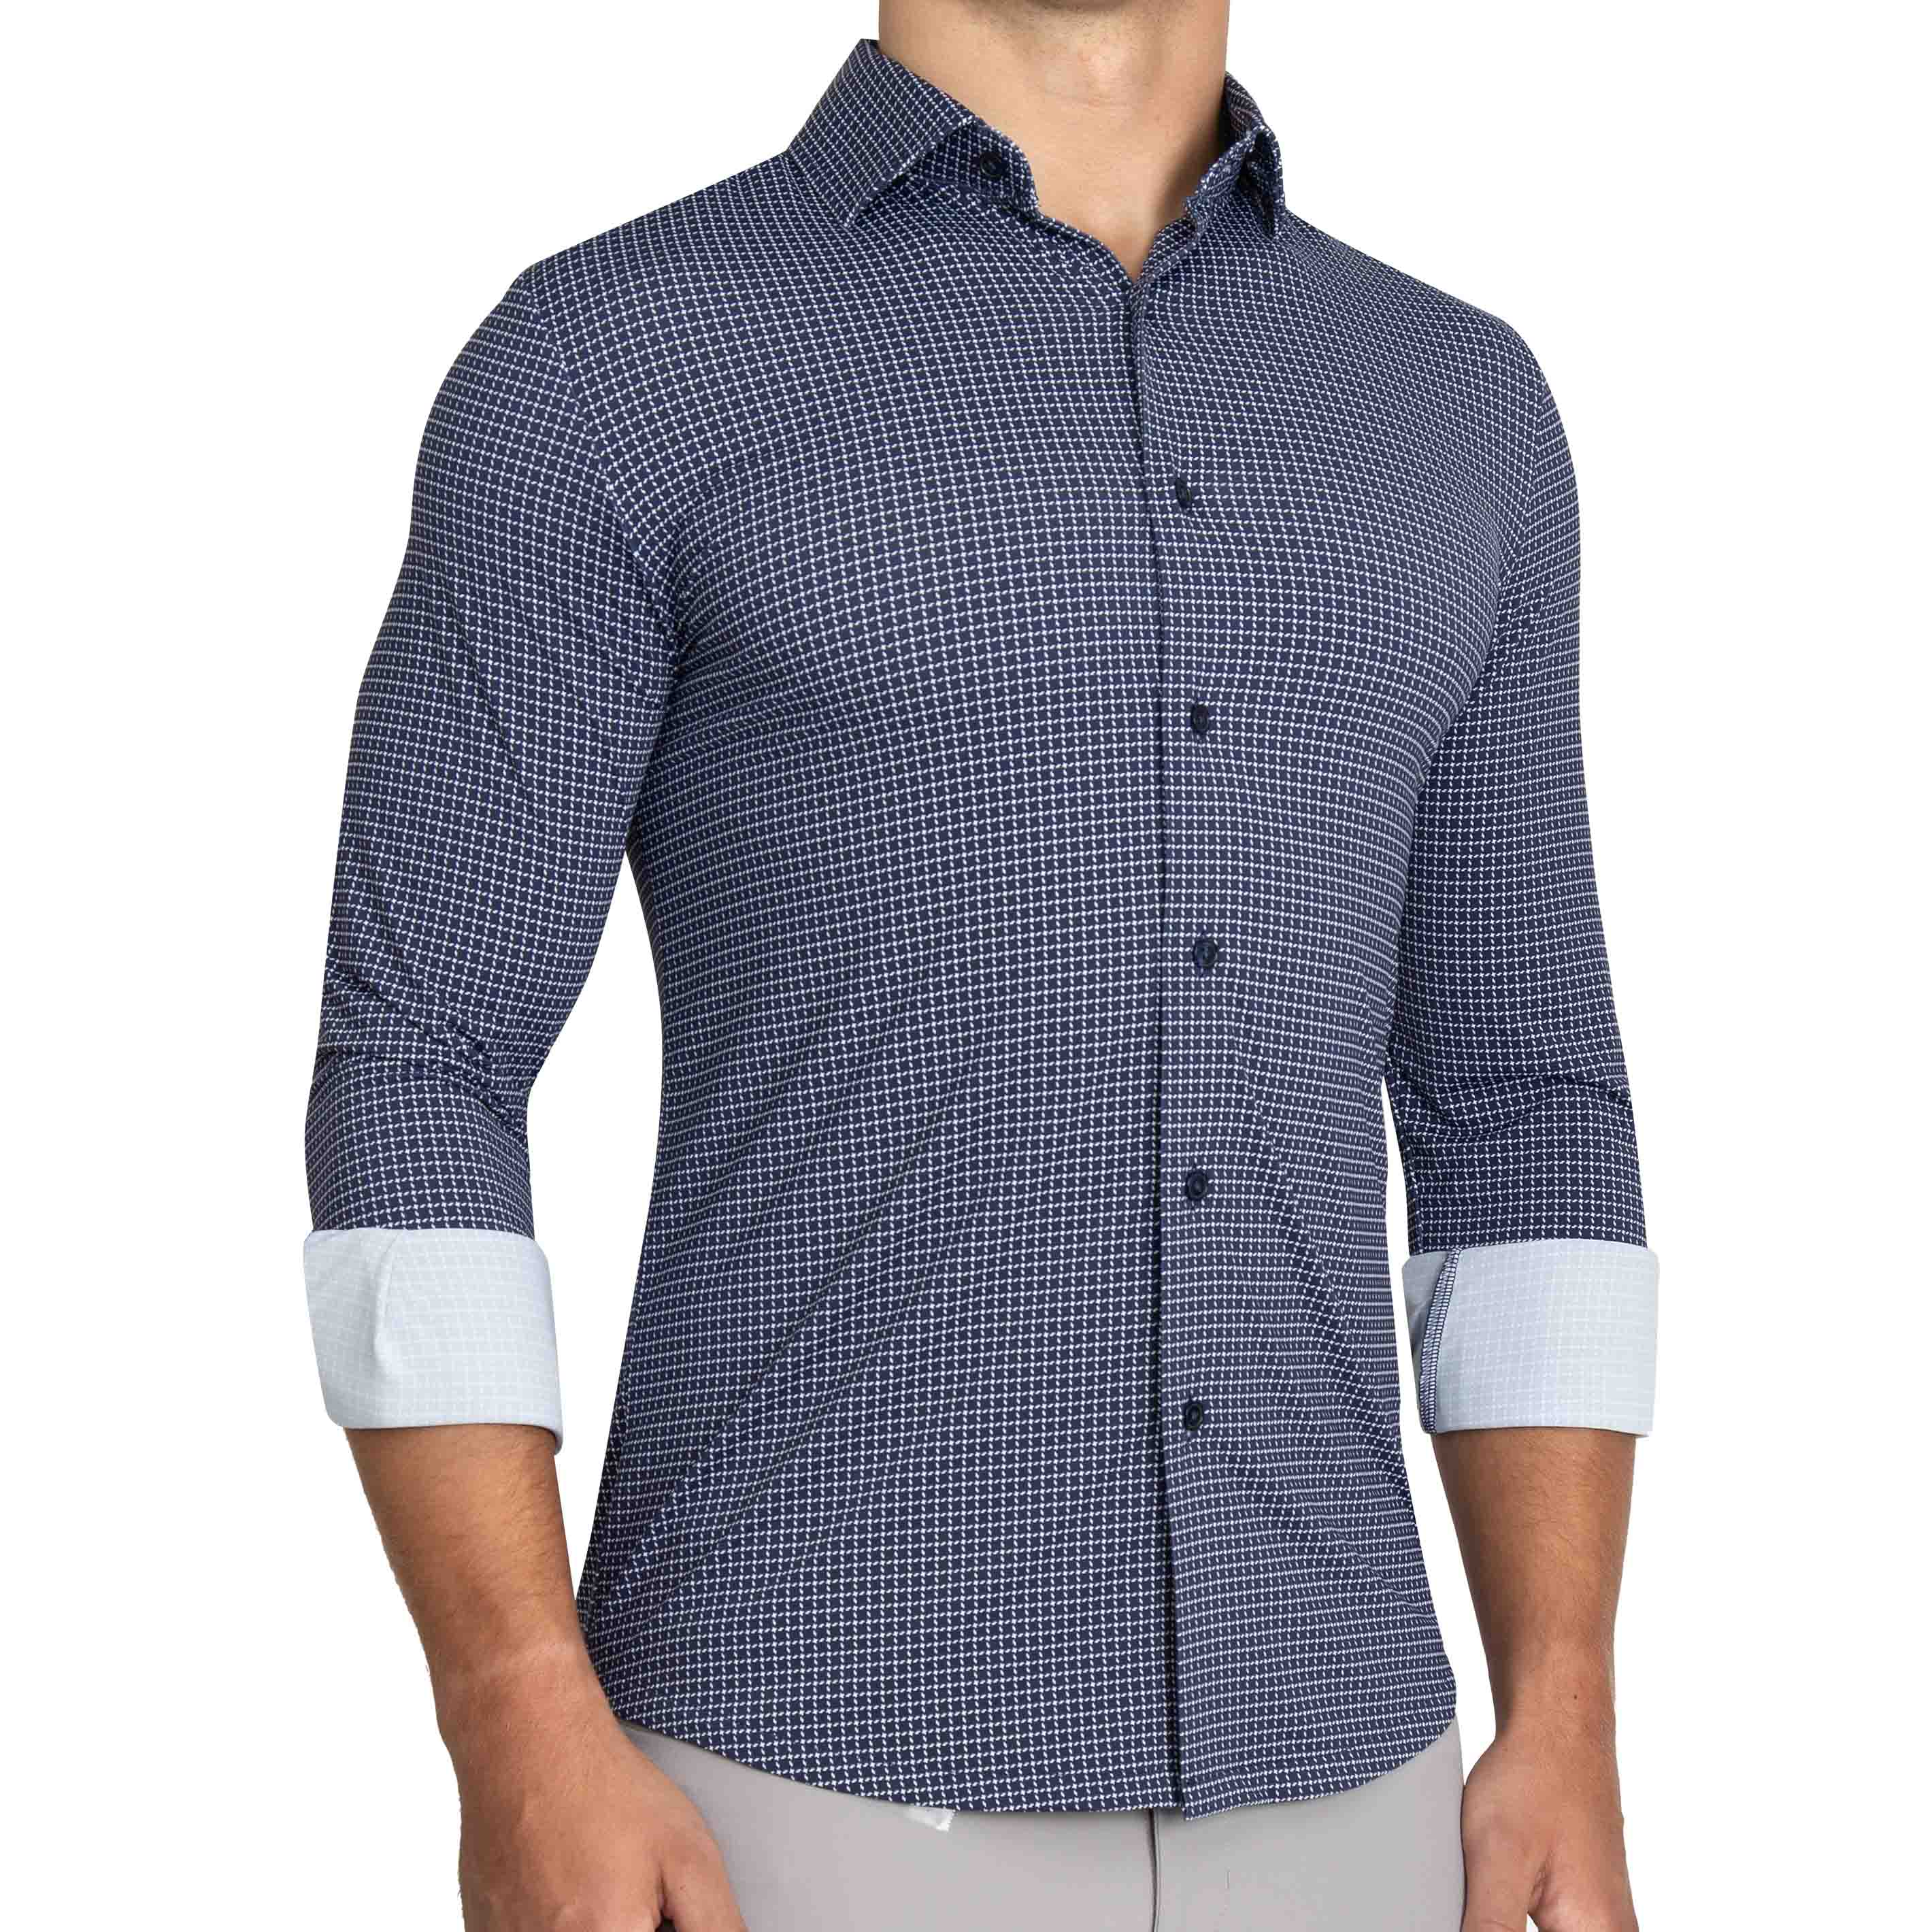 "The Eisenhower" Sport Shirt - Navy With White Grid